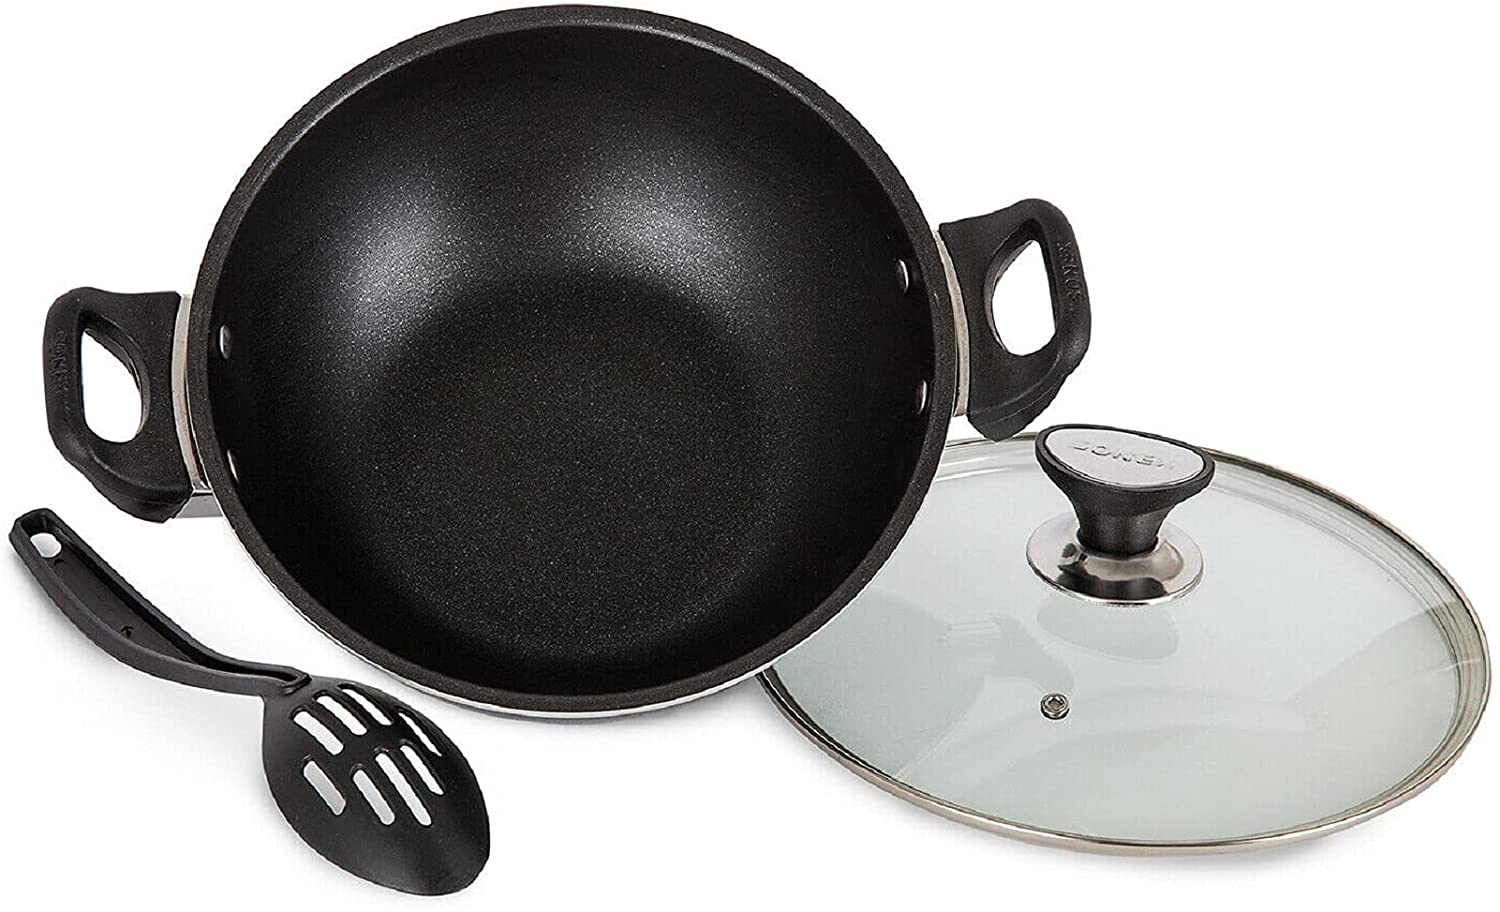 Heavy Material | Dishware Safe | Sonex | Non Stick | Cooking Wok | Kadhai | Karahi | with Glass Lid and Spoon Durable Soft Handles 36 Cm | Easy To Clean | Original Made In Pakistan – 50024